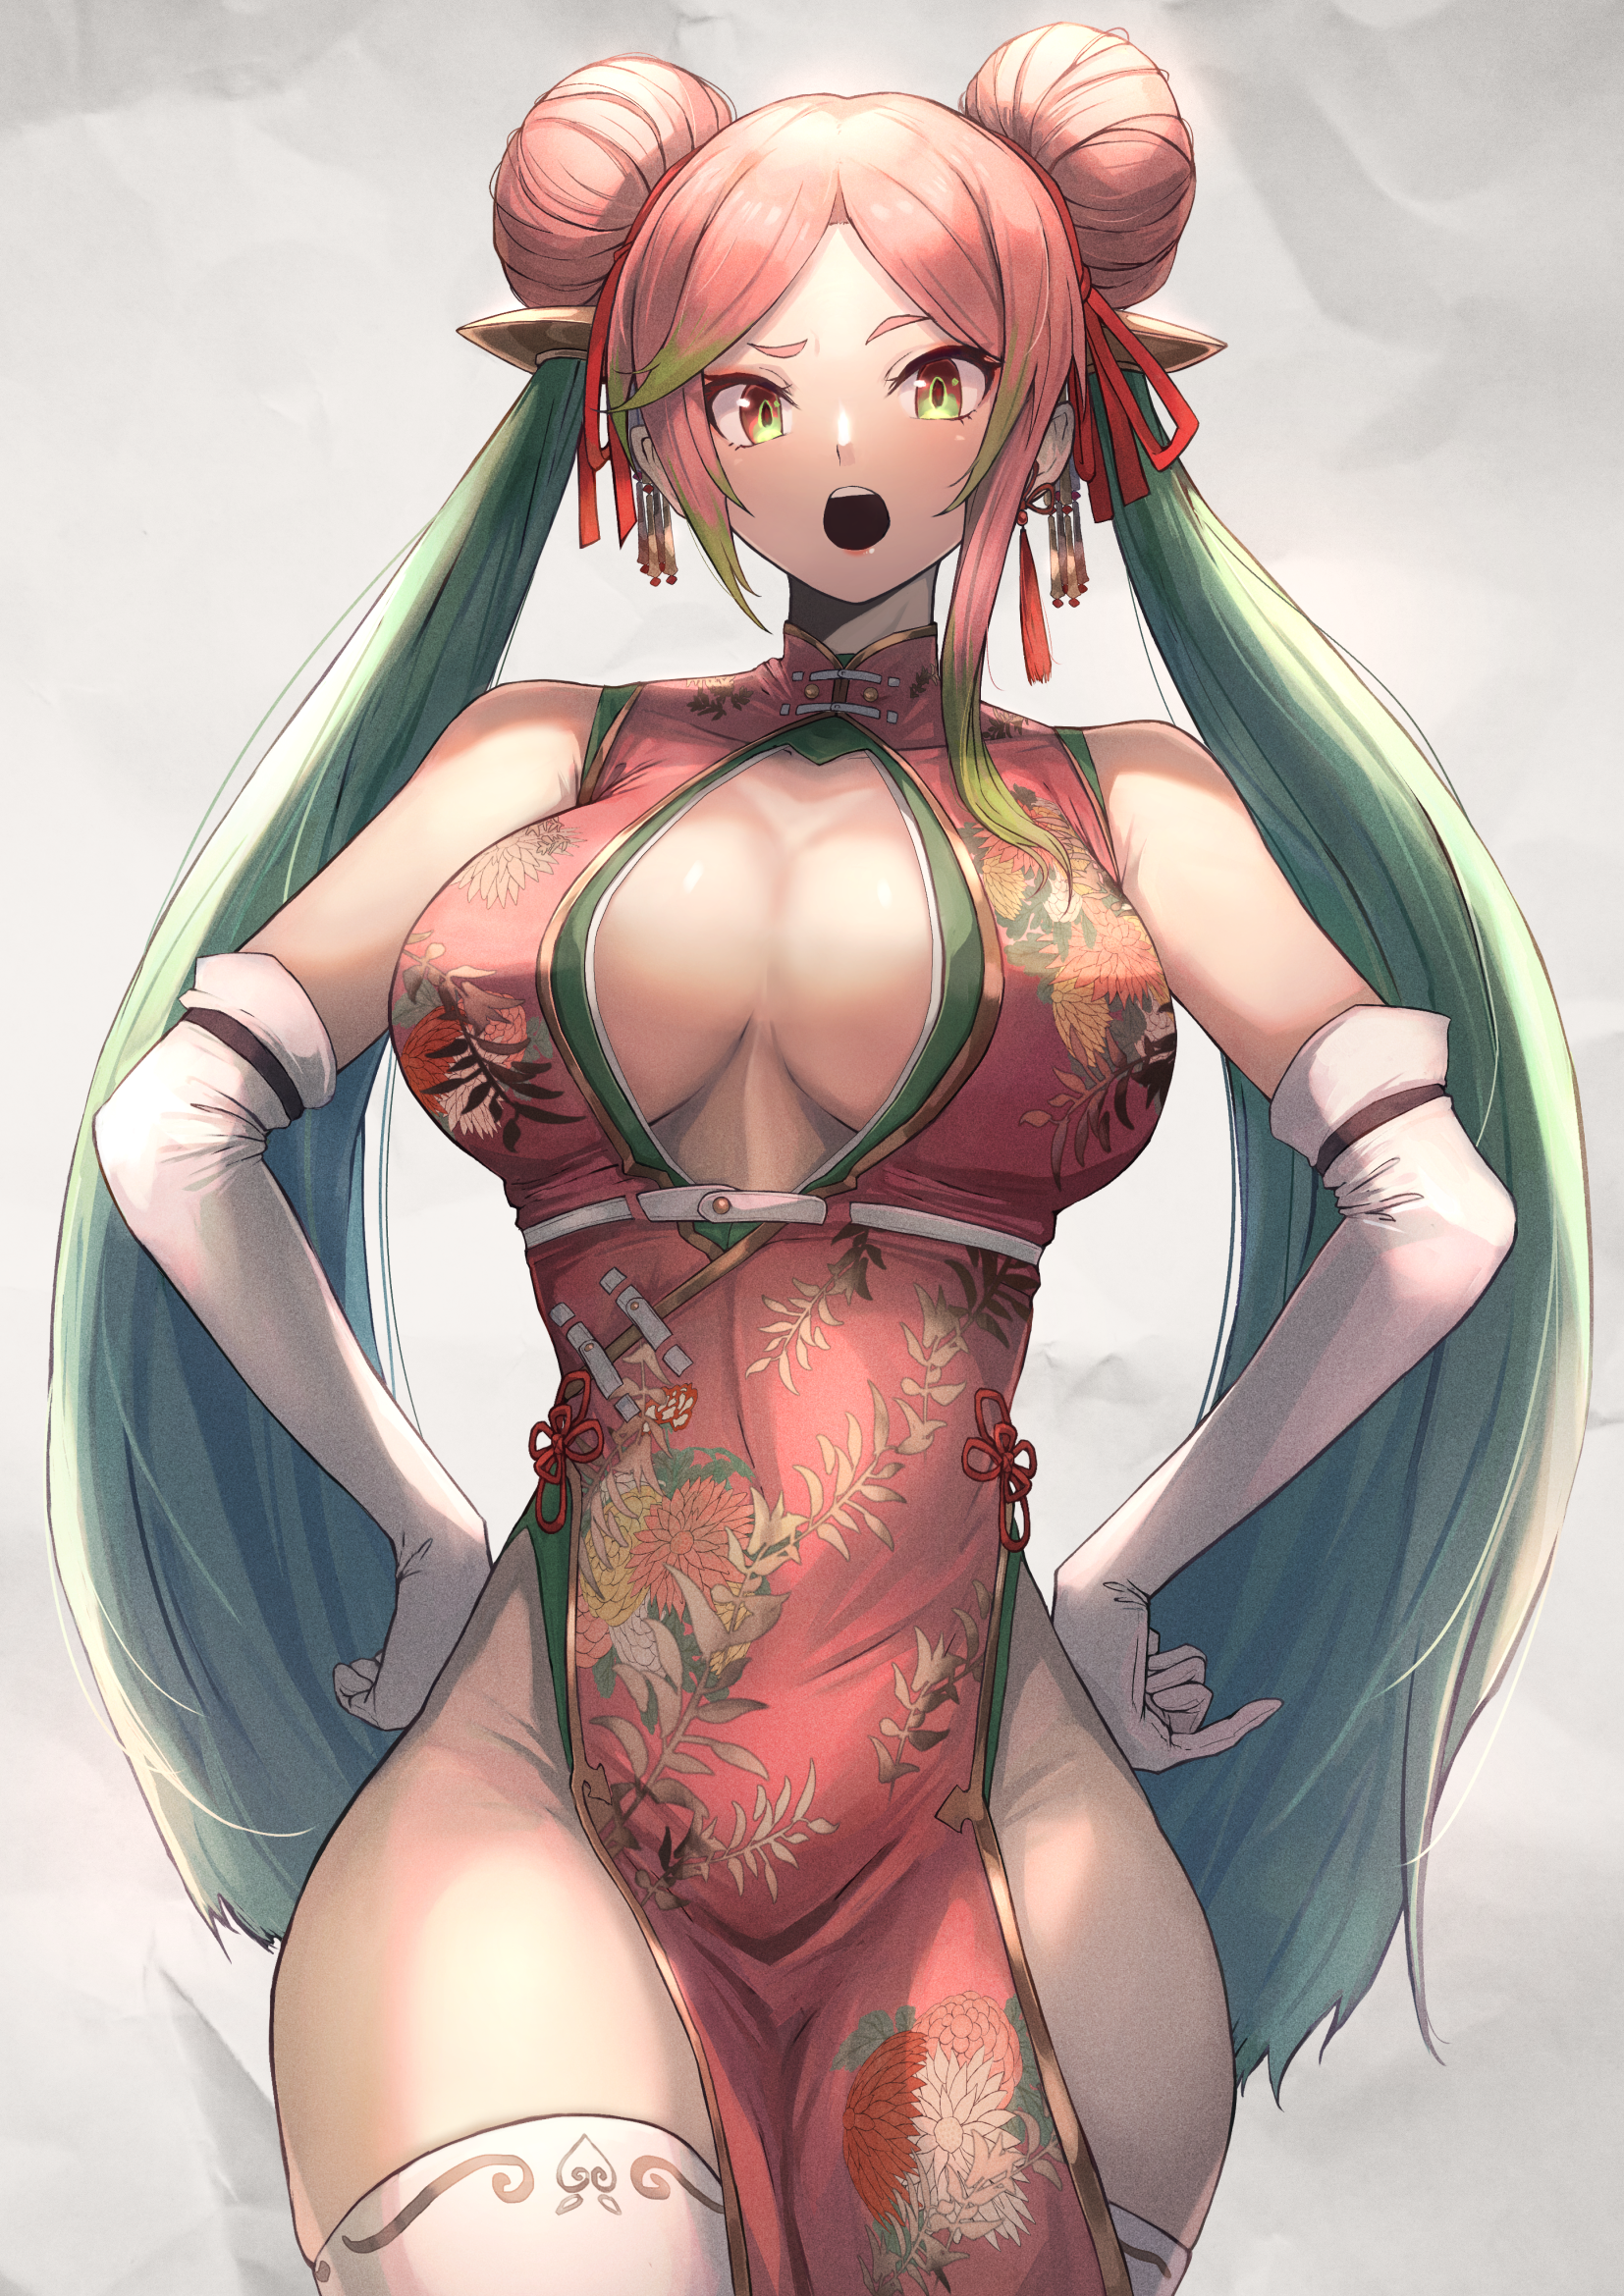 Anime 1654x2339 anime anime girls digital art artwork 2D portrait display frontal view Ohako twintails multi-colored hair Chinese dress cleavage cleavage cutout